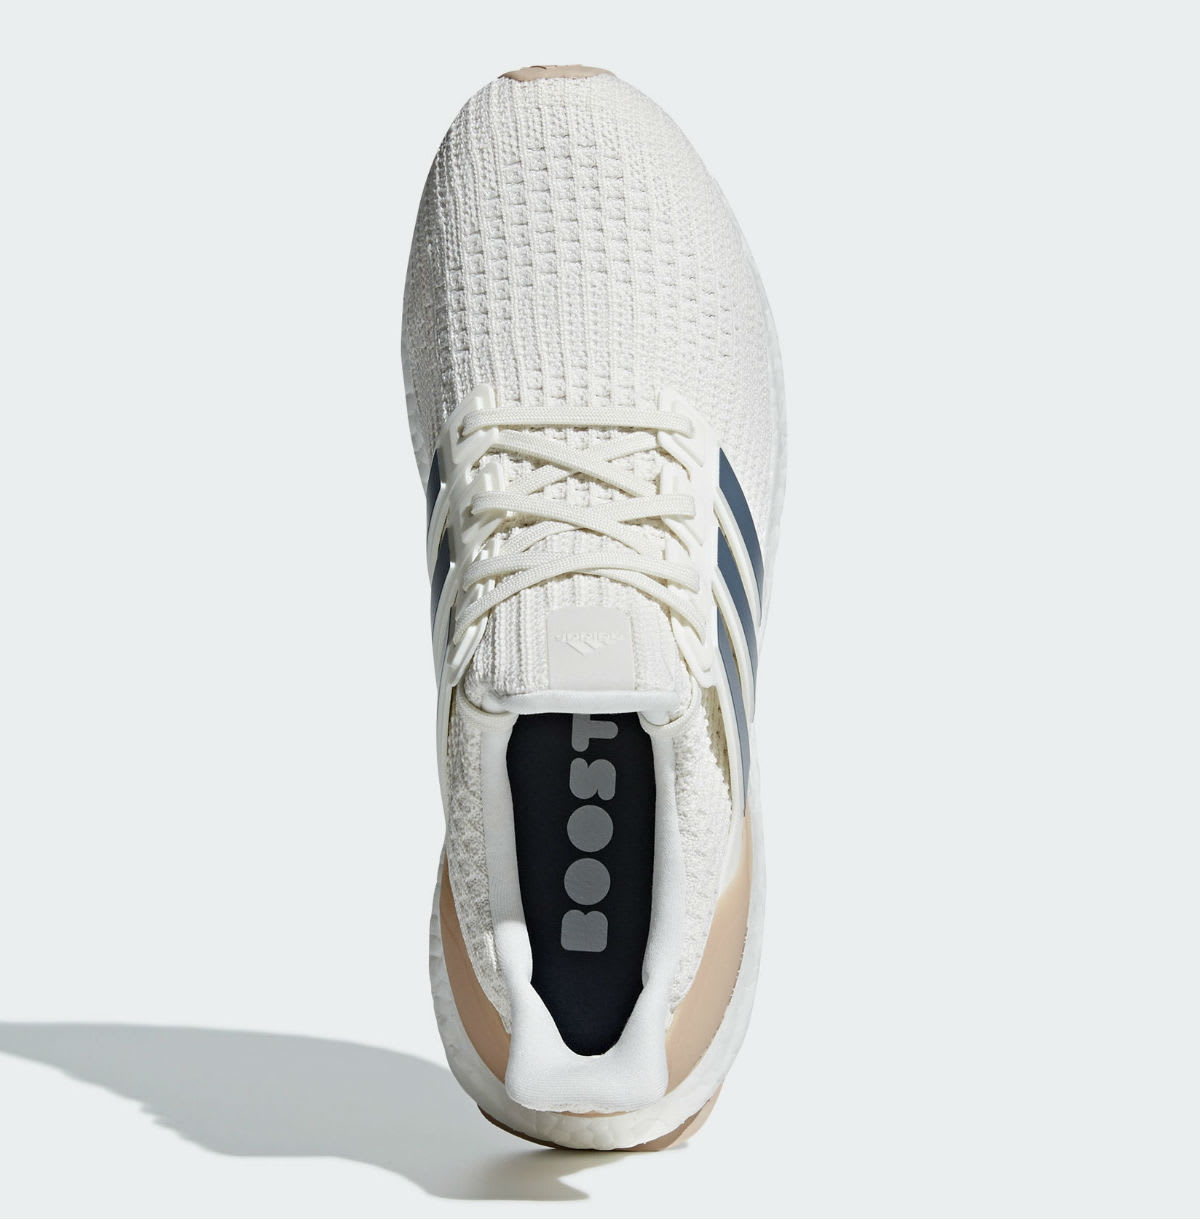 adidas Ultra Boost 4.0 Show Your Stripes Beige Cm8114-5